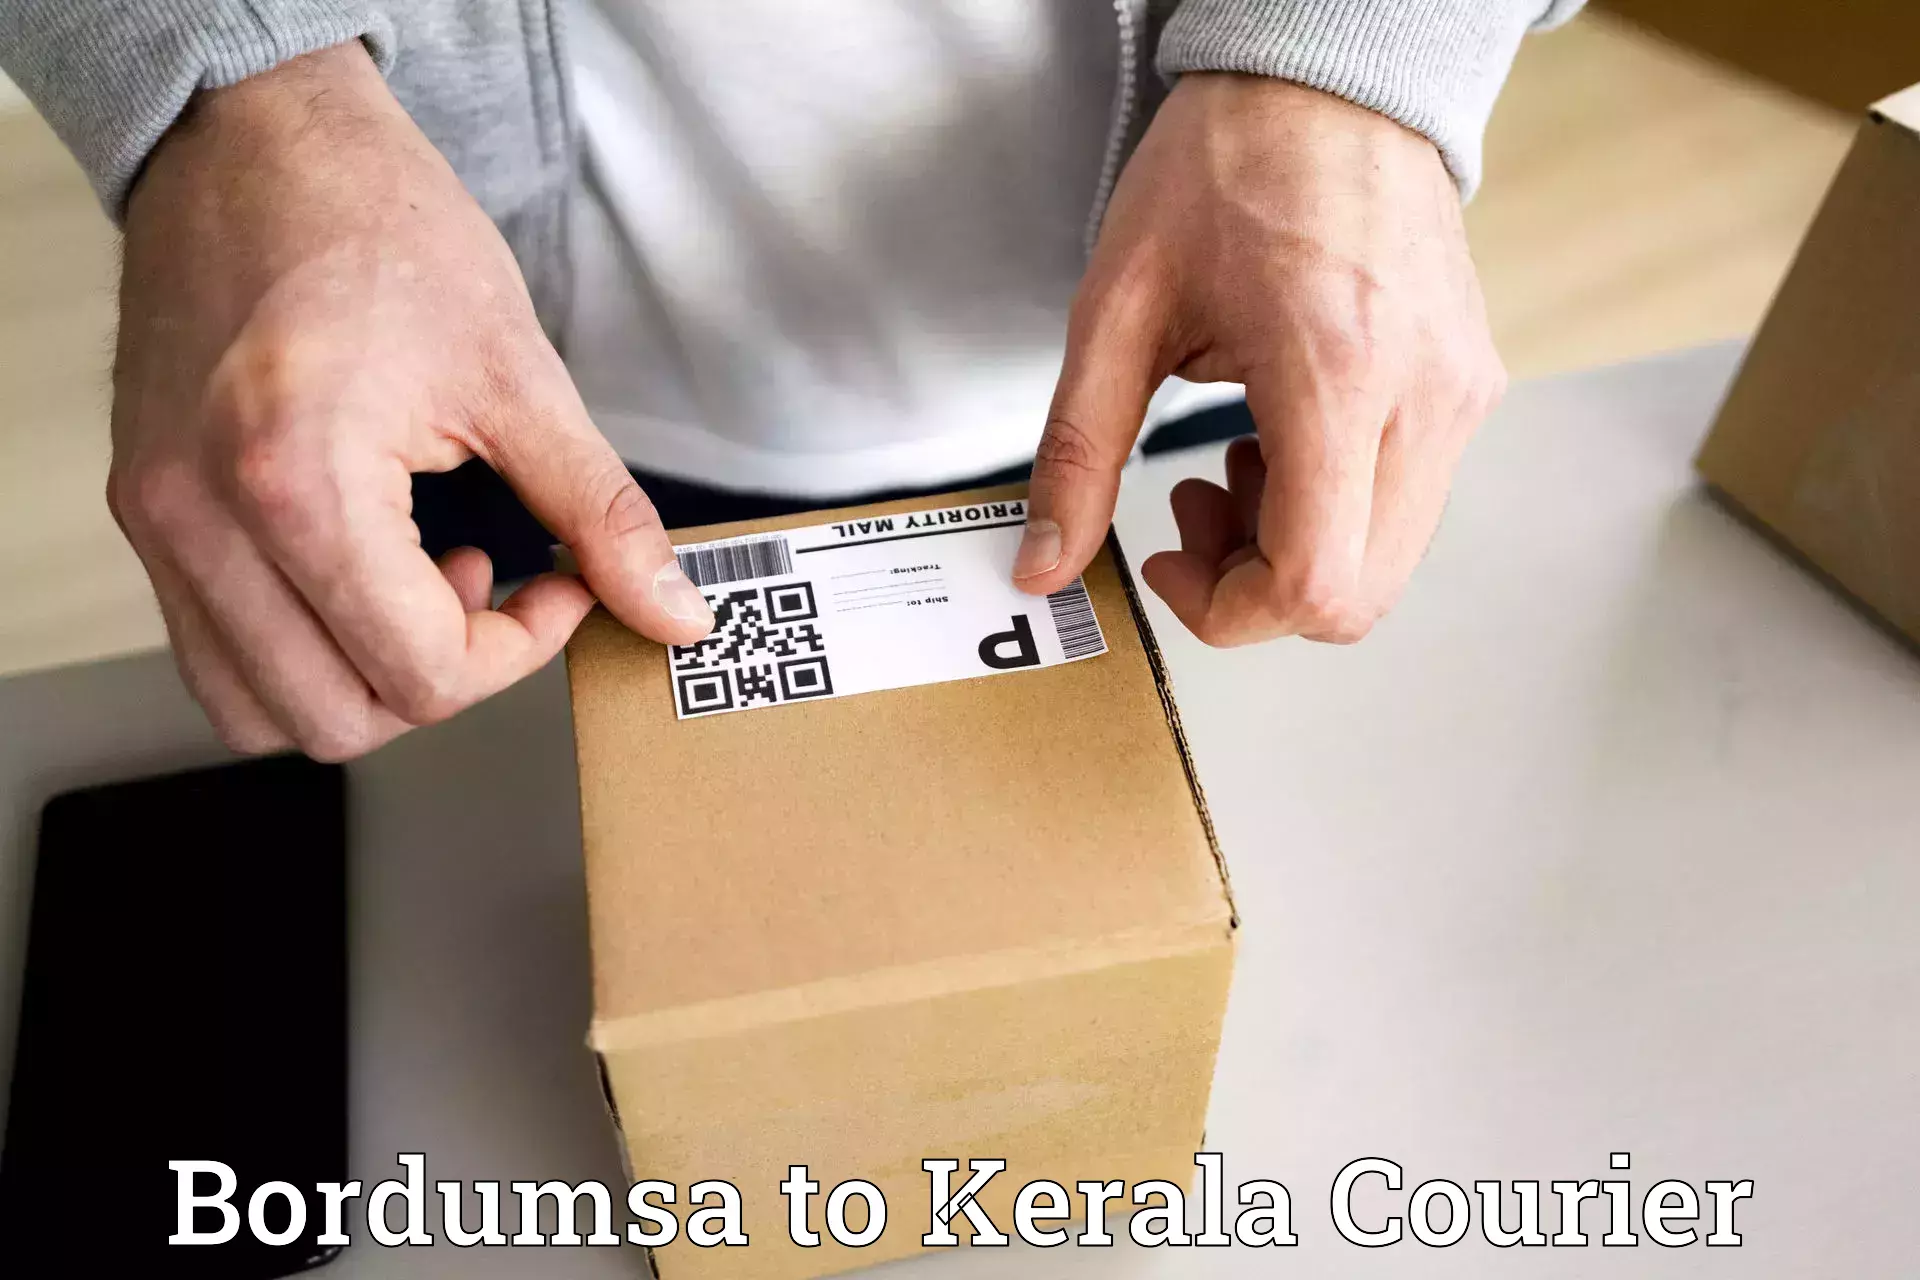 State-of-the-art courier technology Bordumsa to Cochin Port Kochi